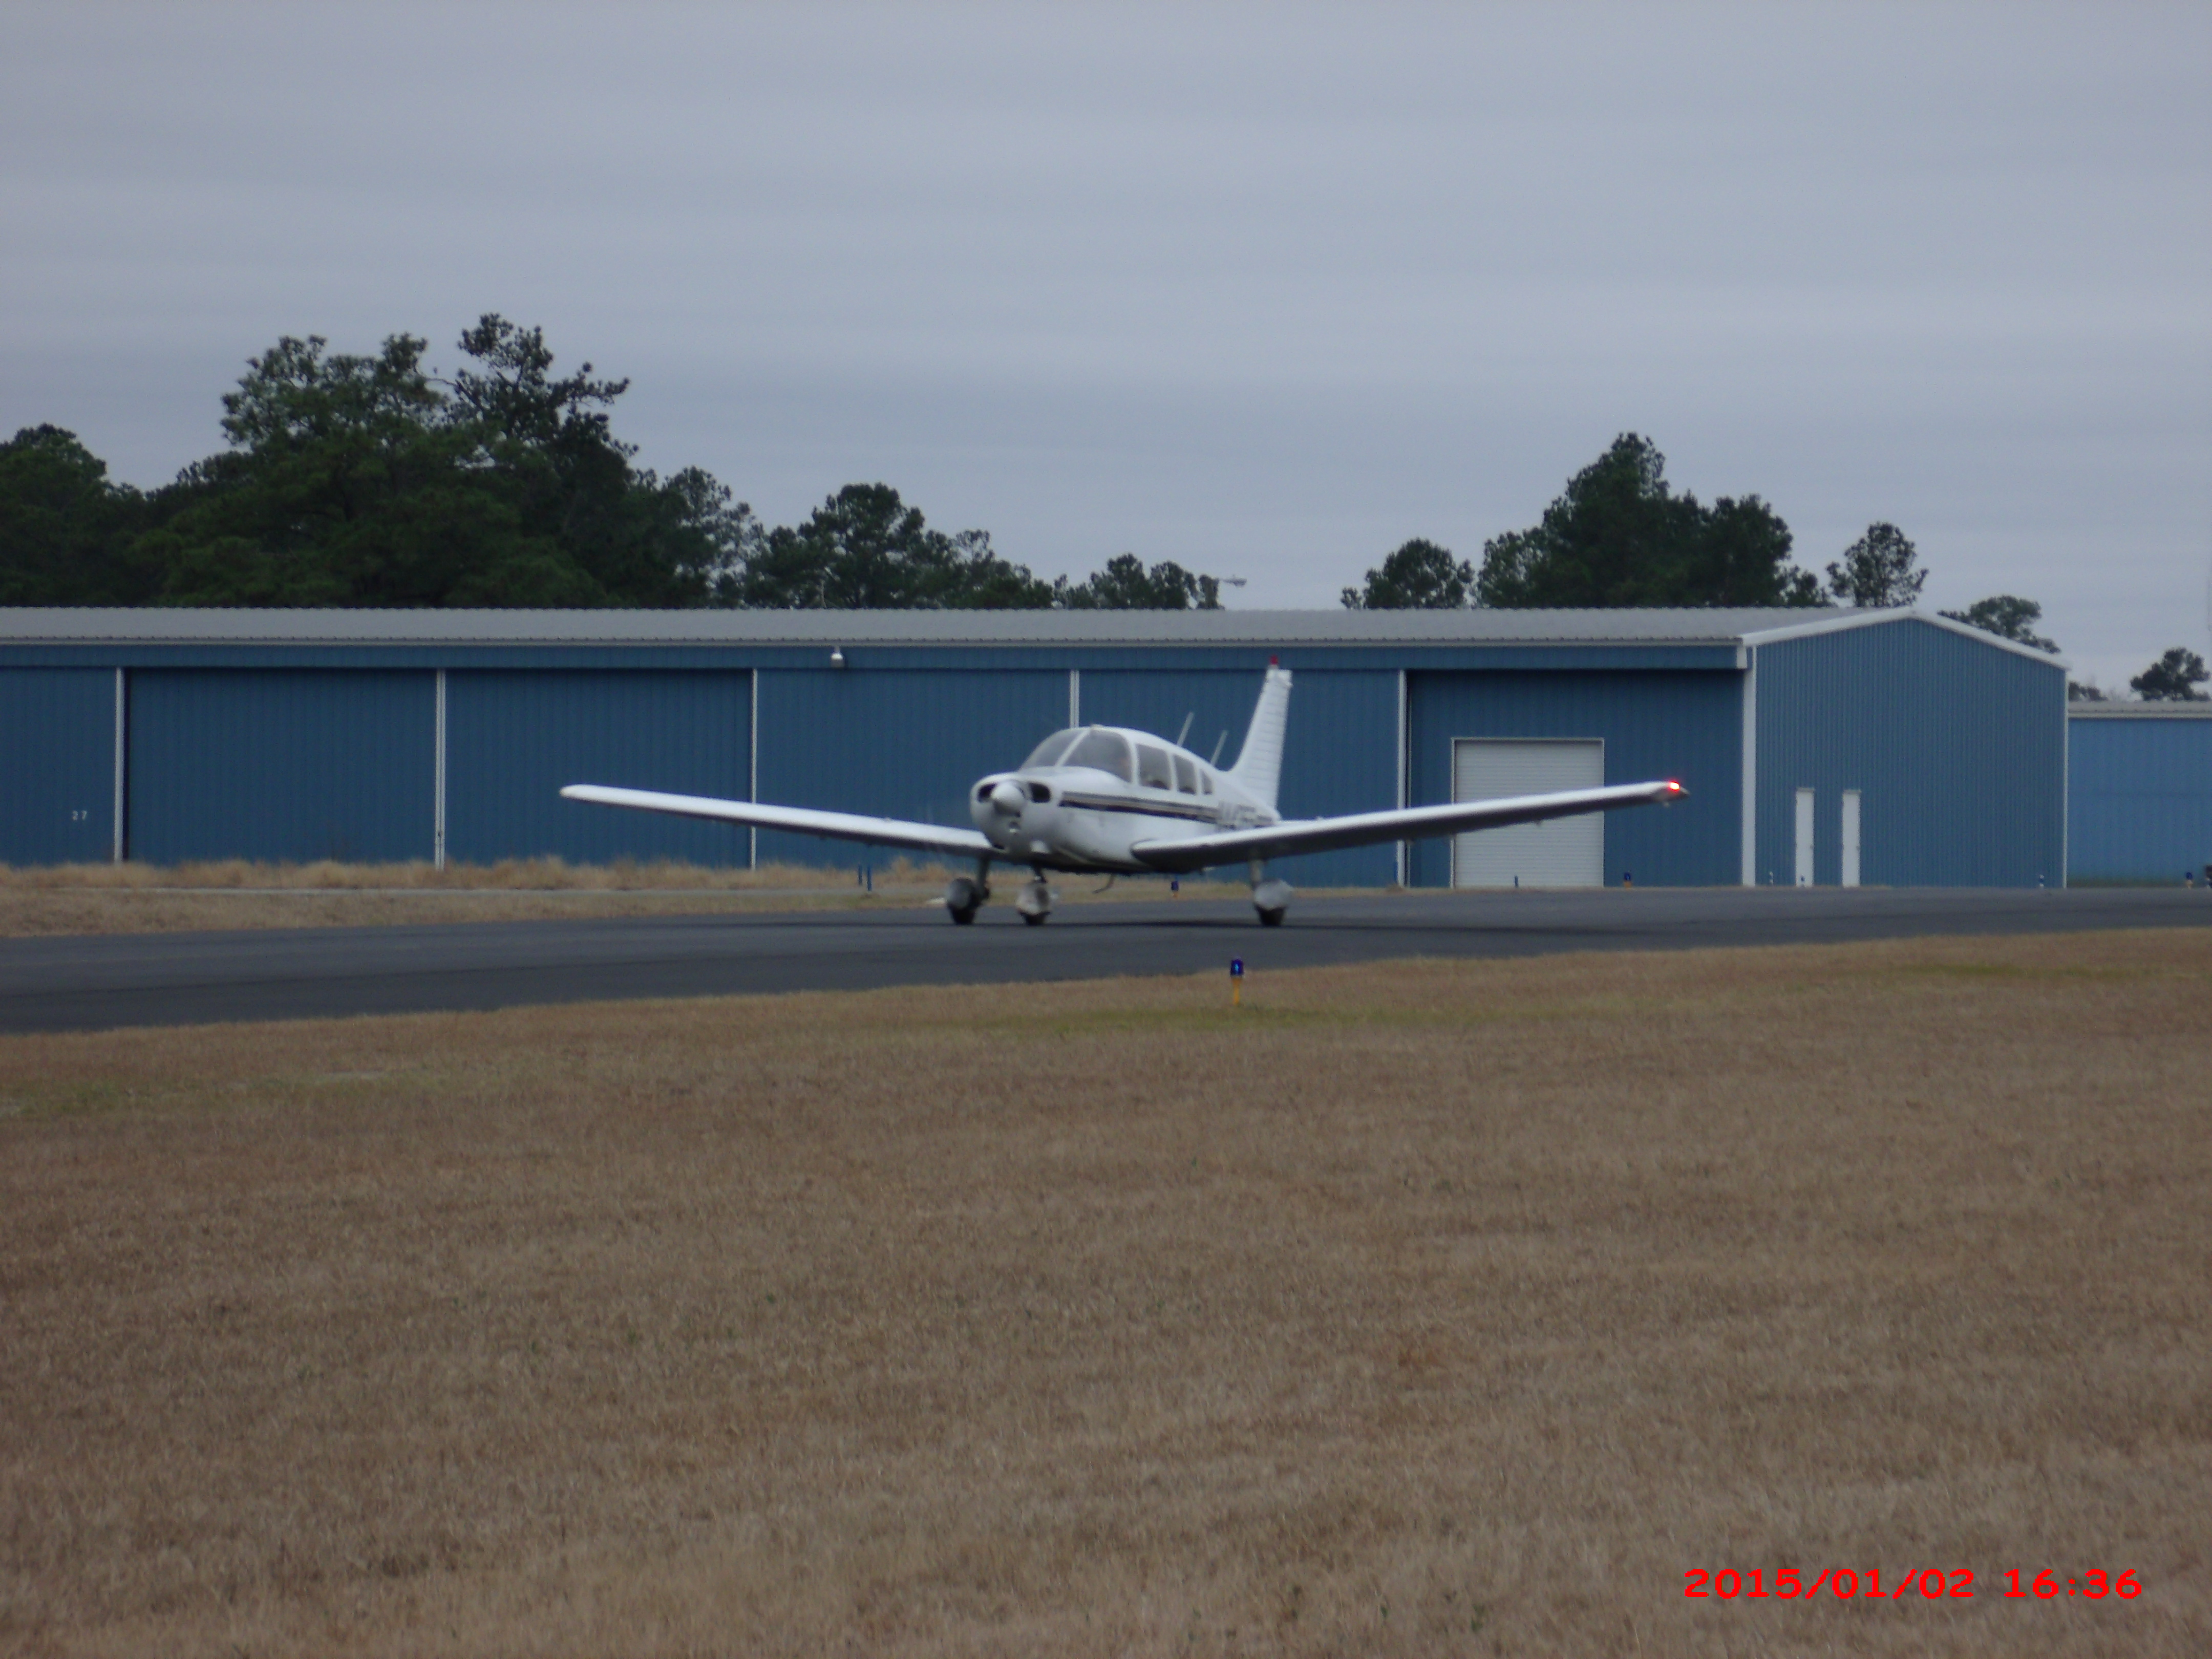 Piper Warrior for Flight Training or Aircraft Rental at Statesboro Bulloch County Airport